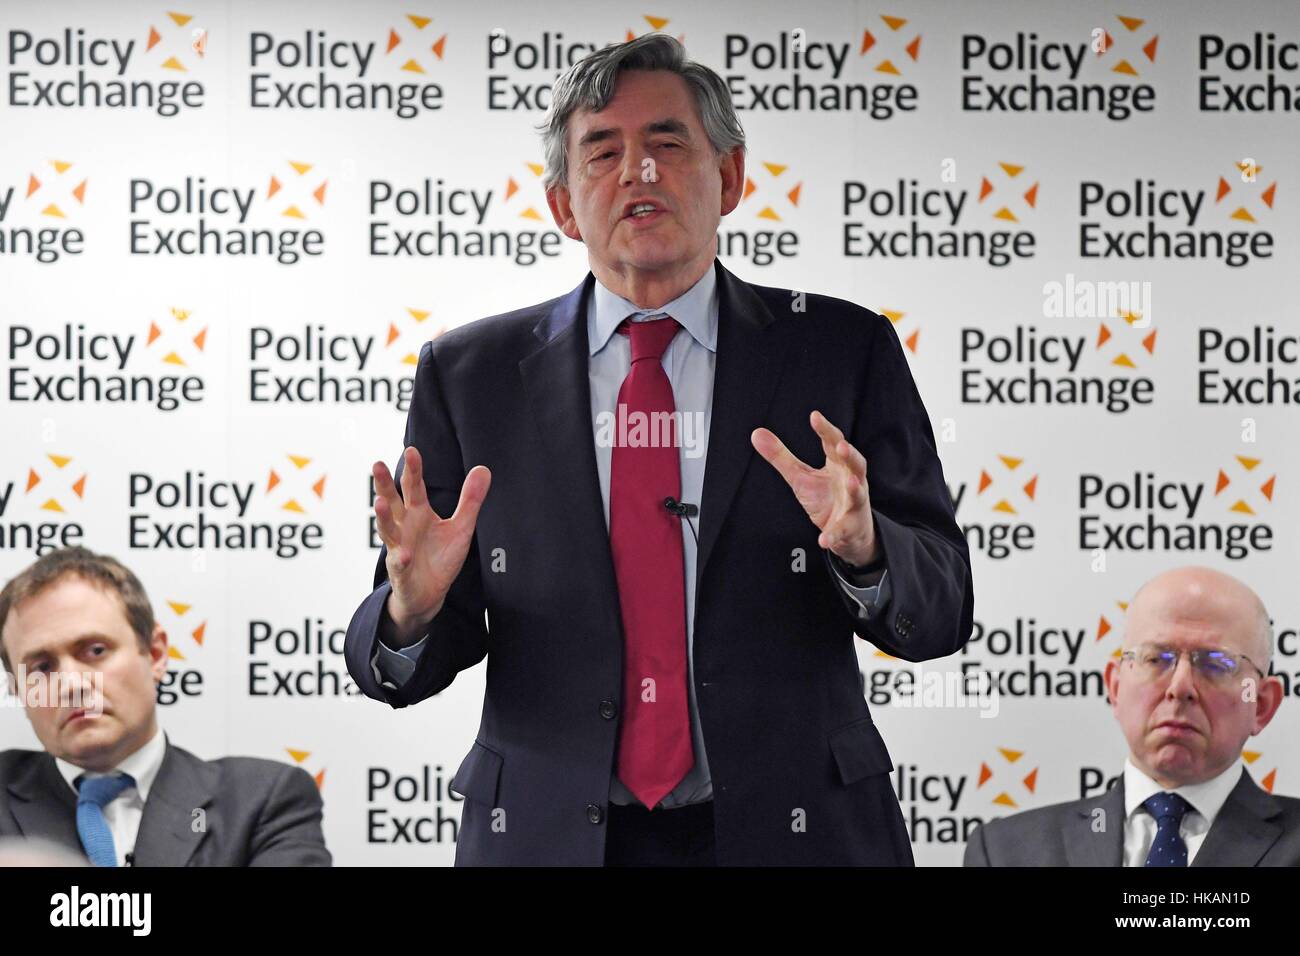 Former Prime Minister Gordon Brown speaks at the launch of a new bipartisan report titled The Cost of Doing Nothing, co-authored by the late Jo Cox MP, at the Policy Exchange in Westminster, London. Stock Photo